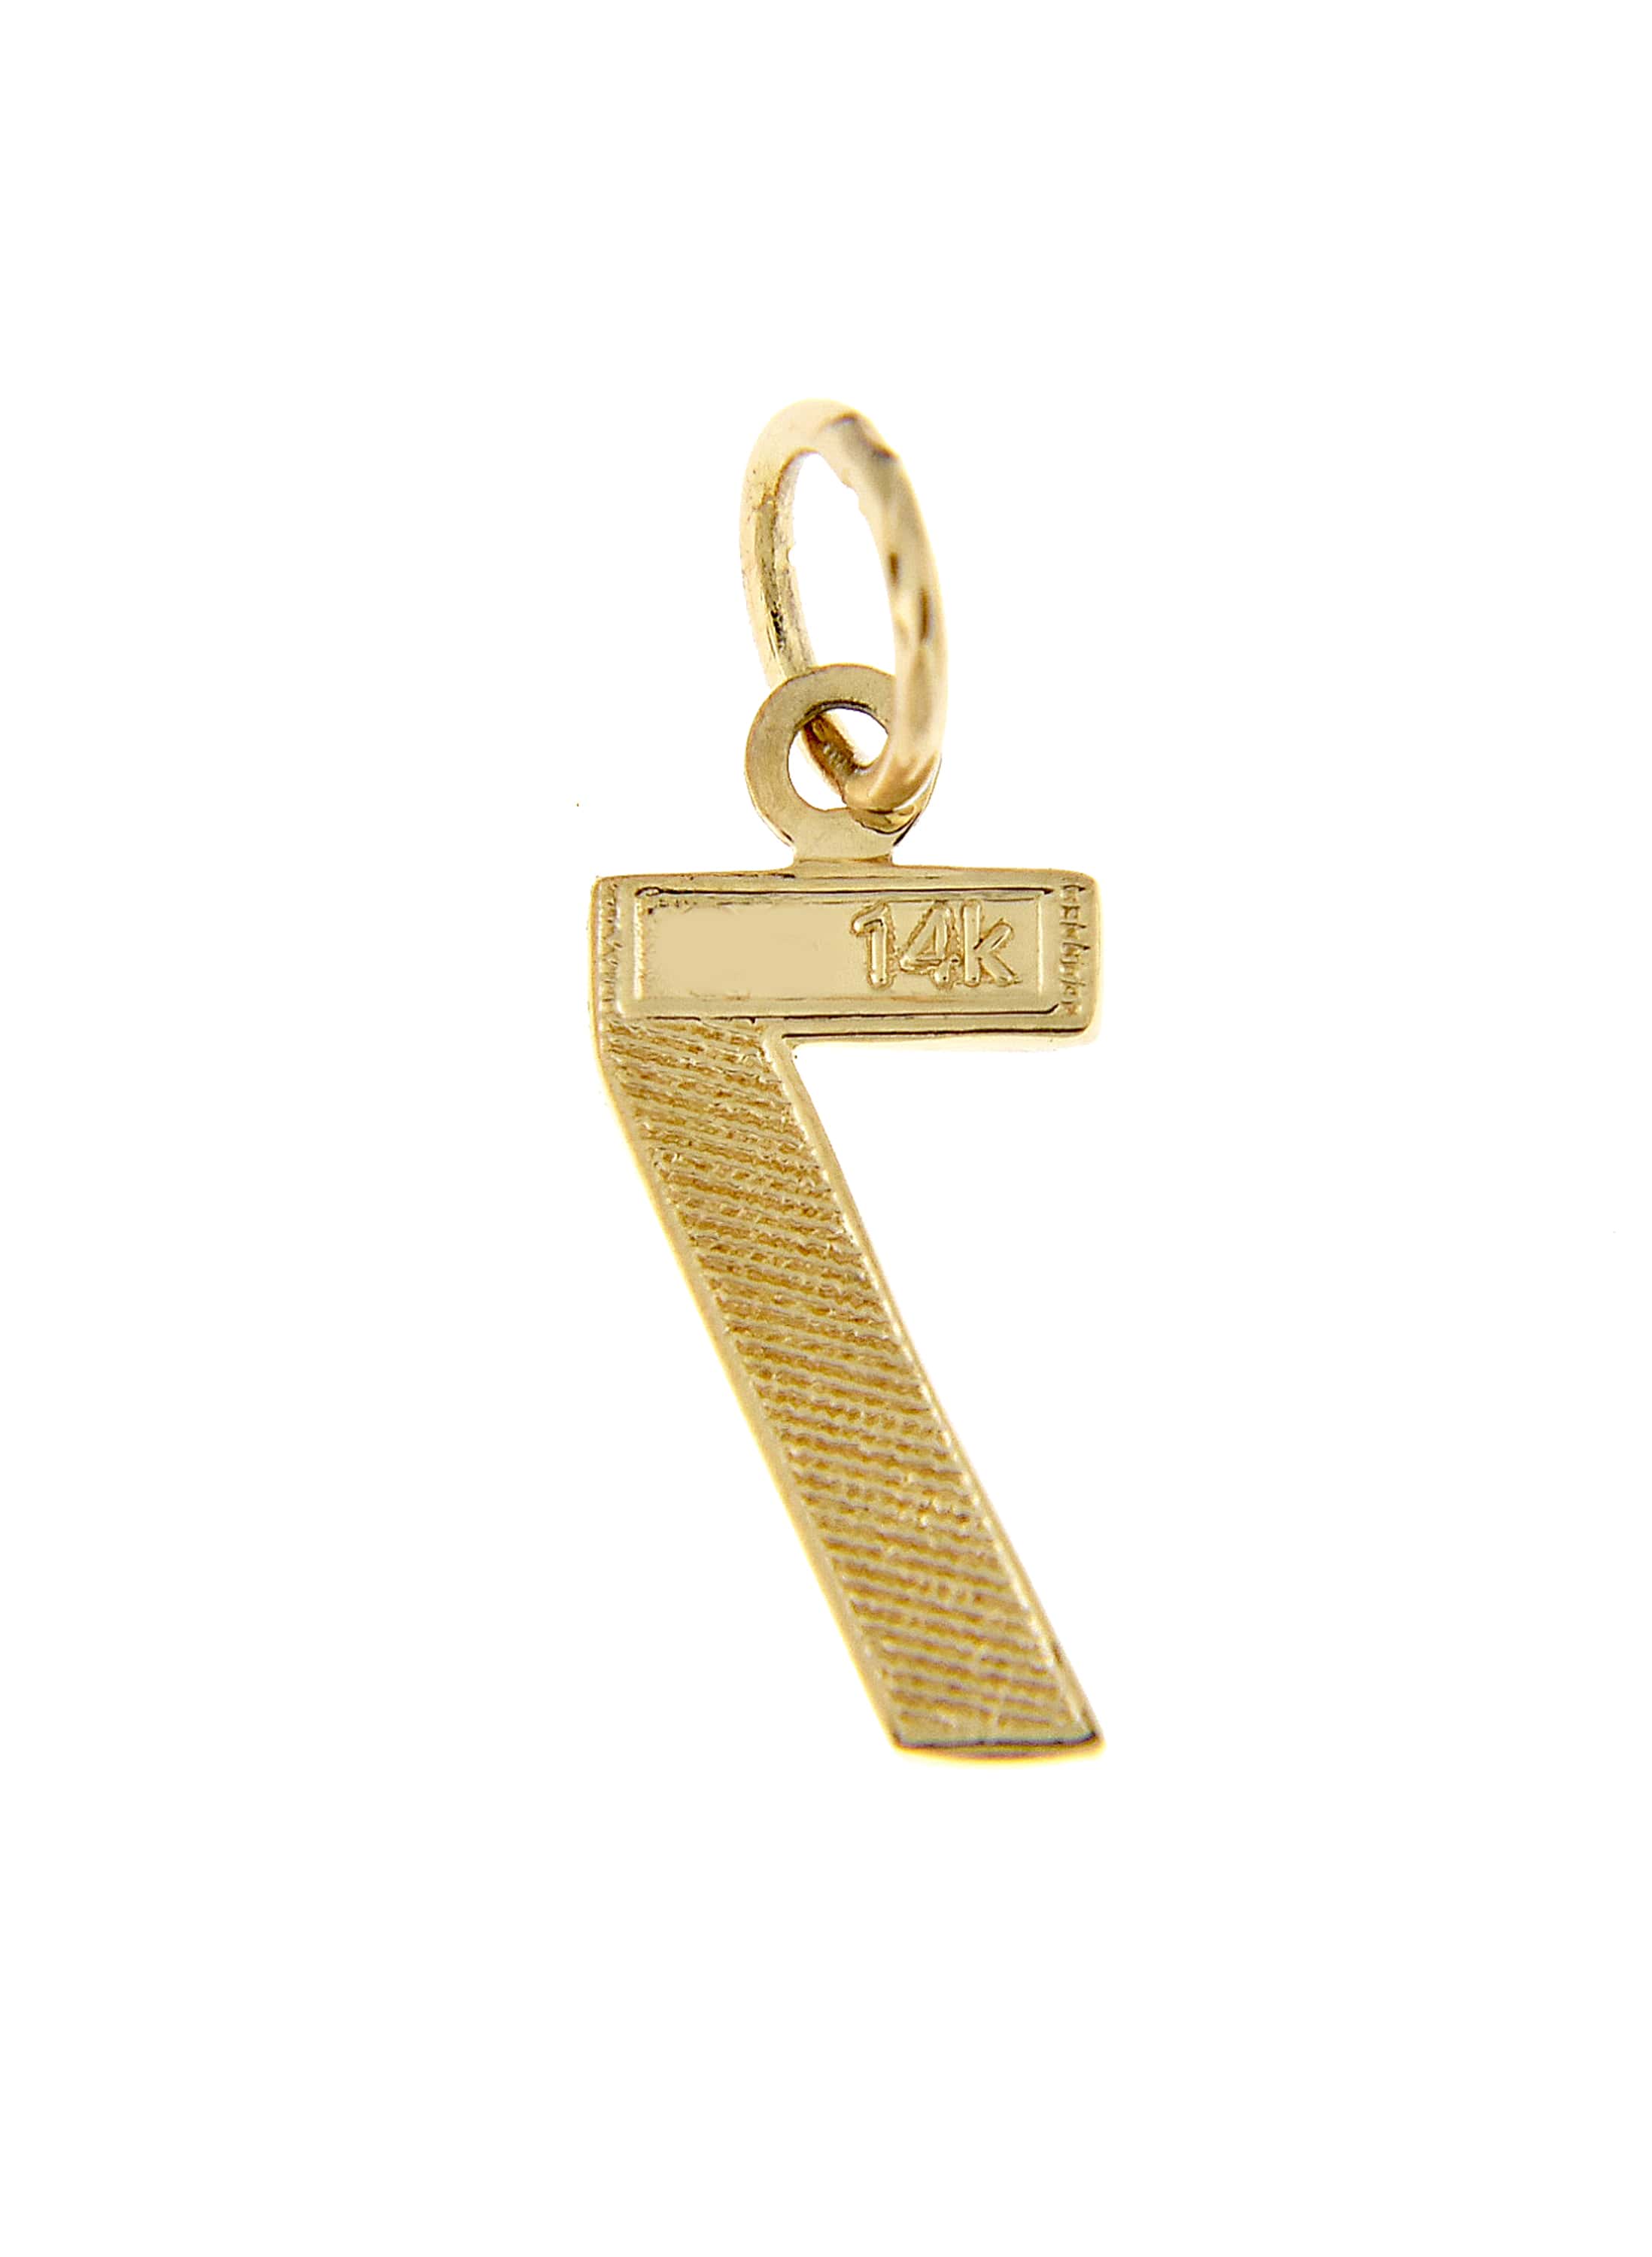 14k Yellow Gold Number 7 Seven Pendant Charm